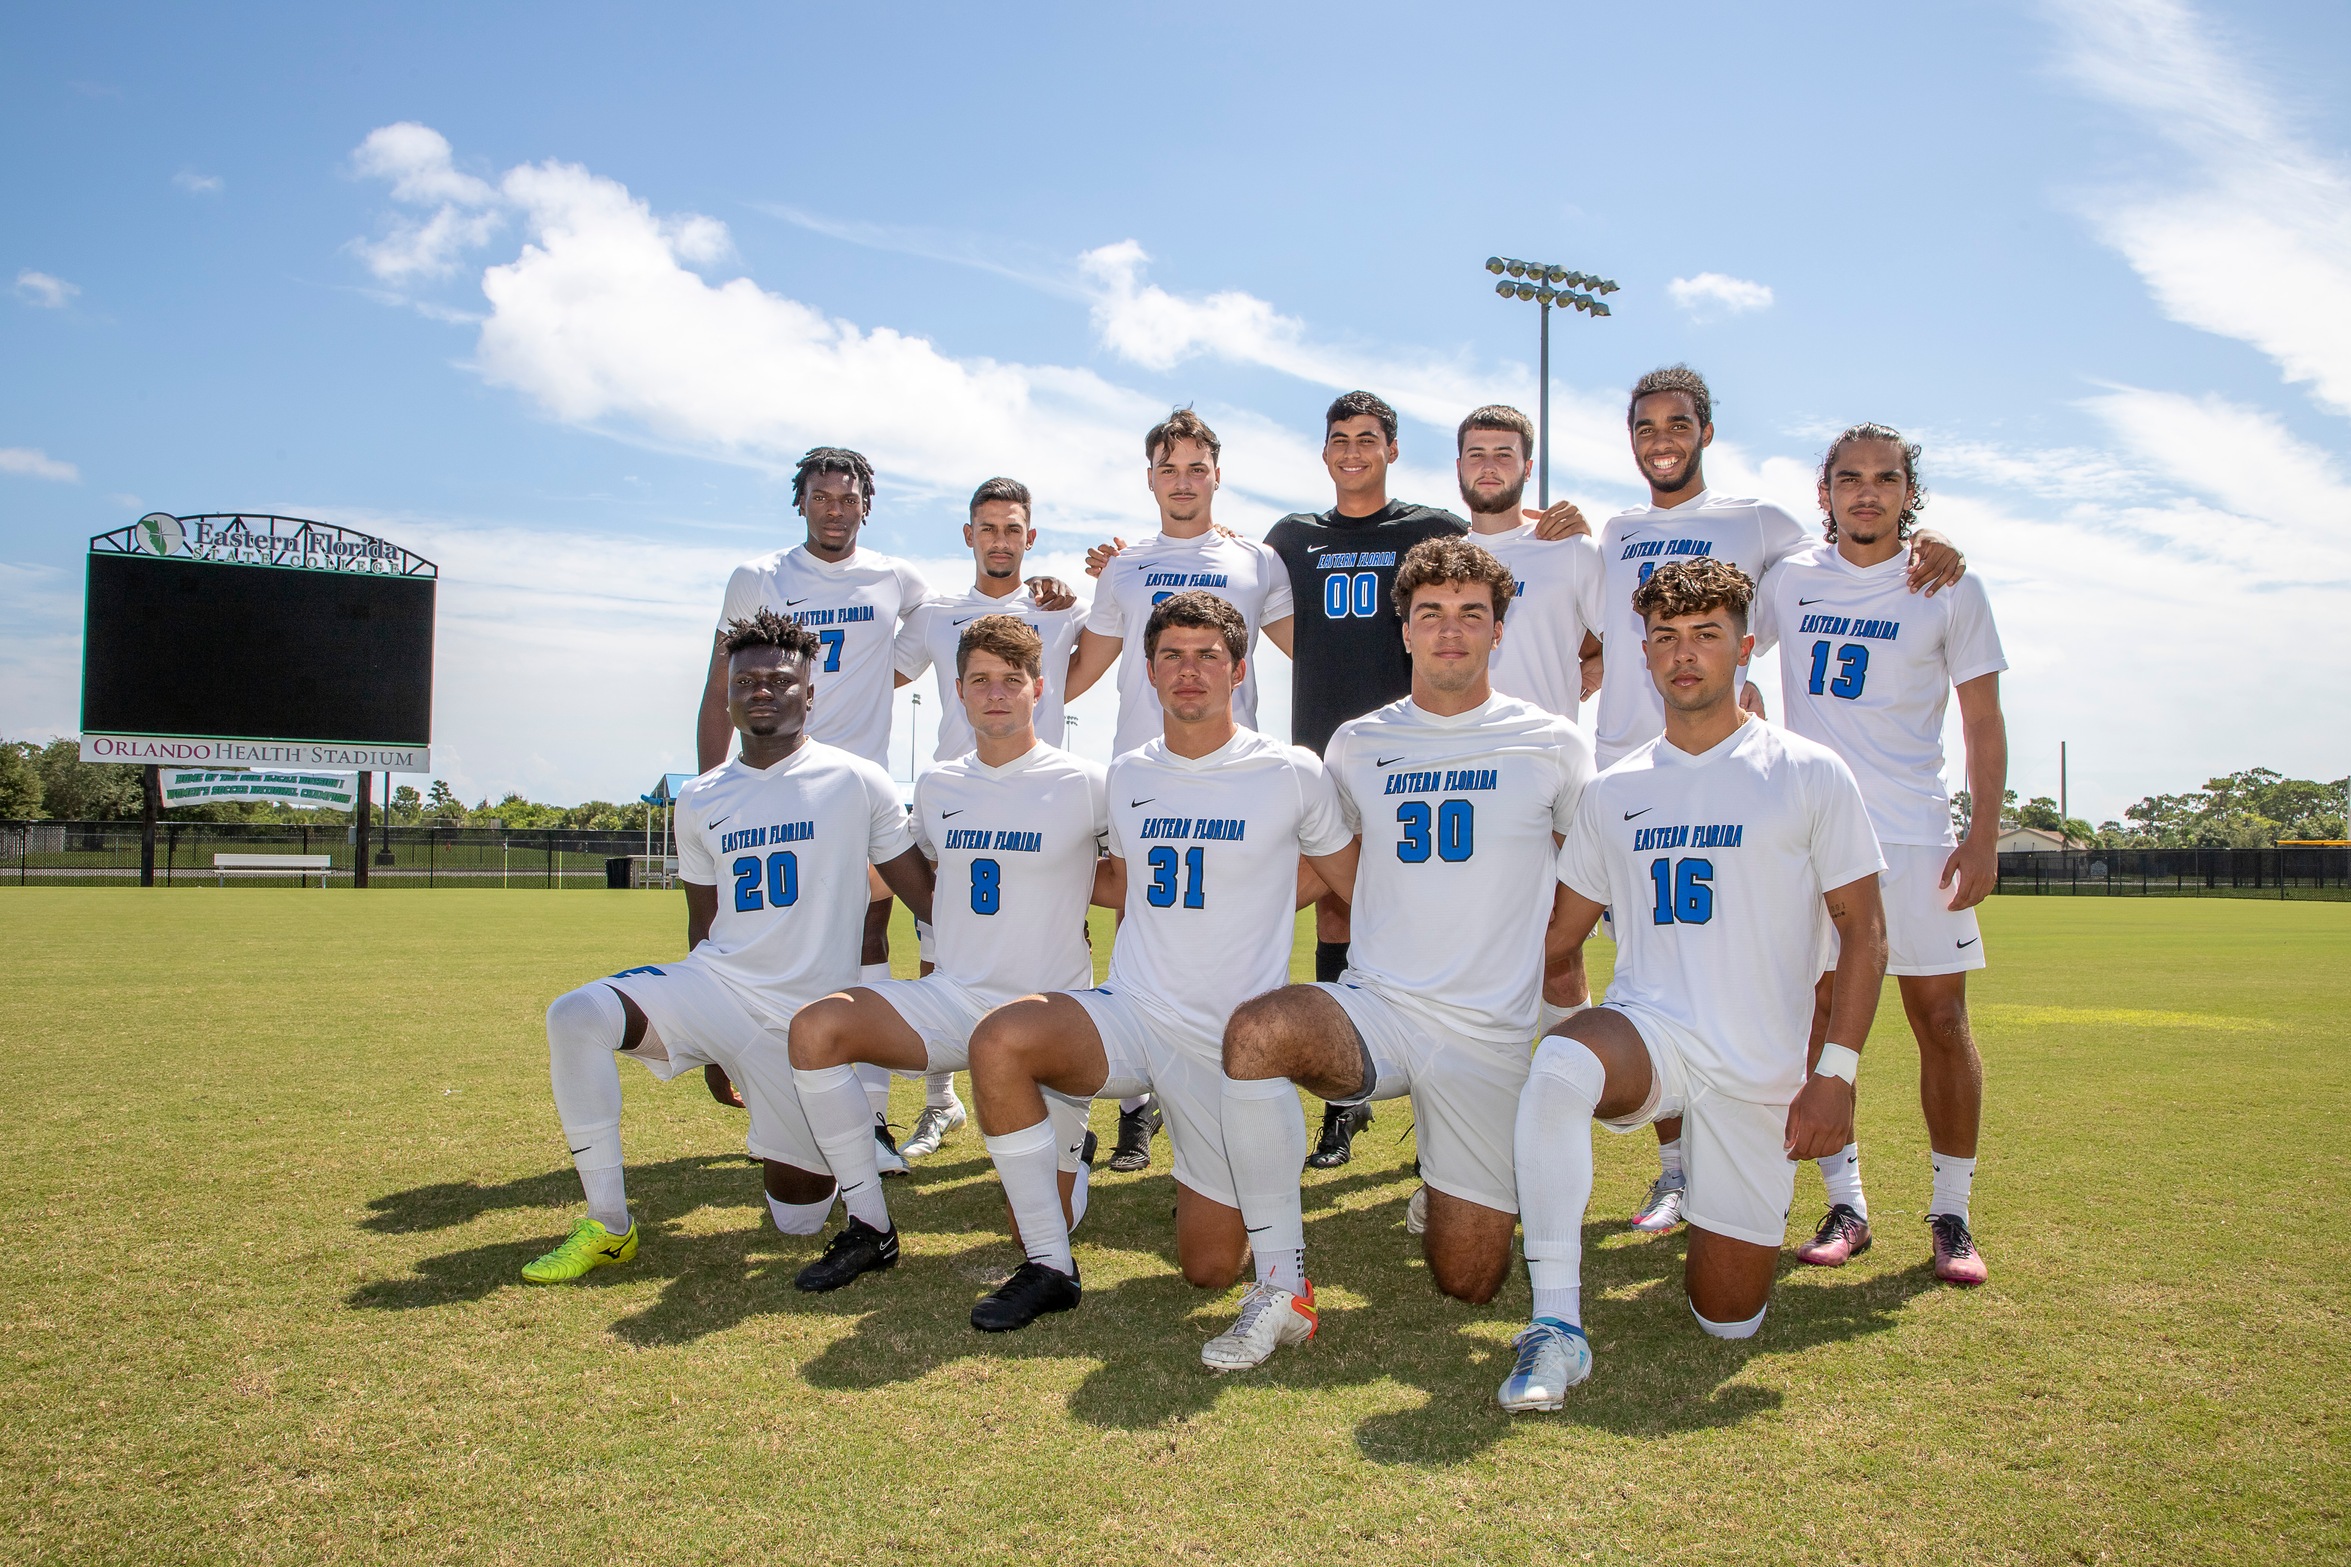 Men's soccer team to honor sophomores Saturday night after game